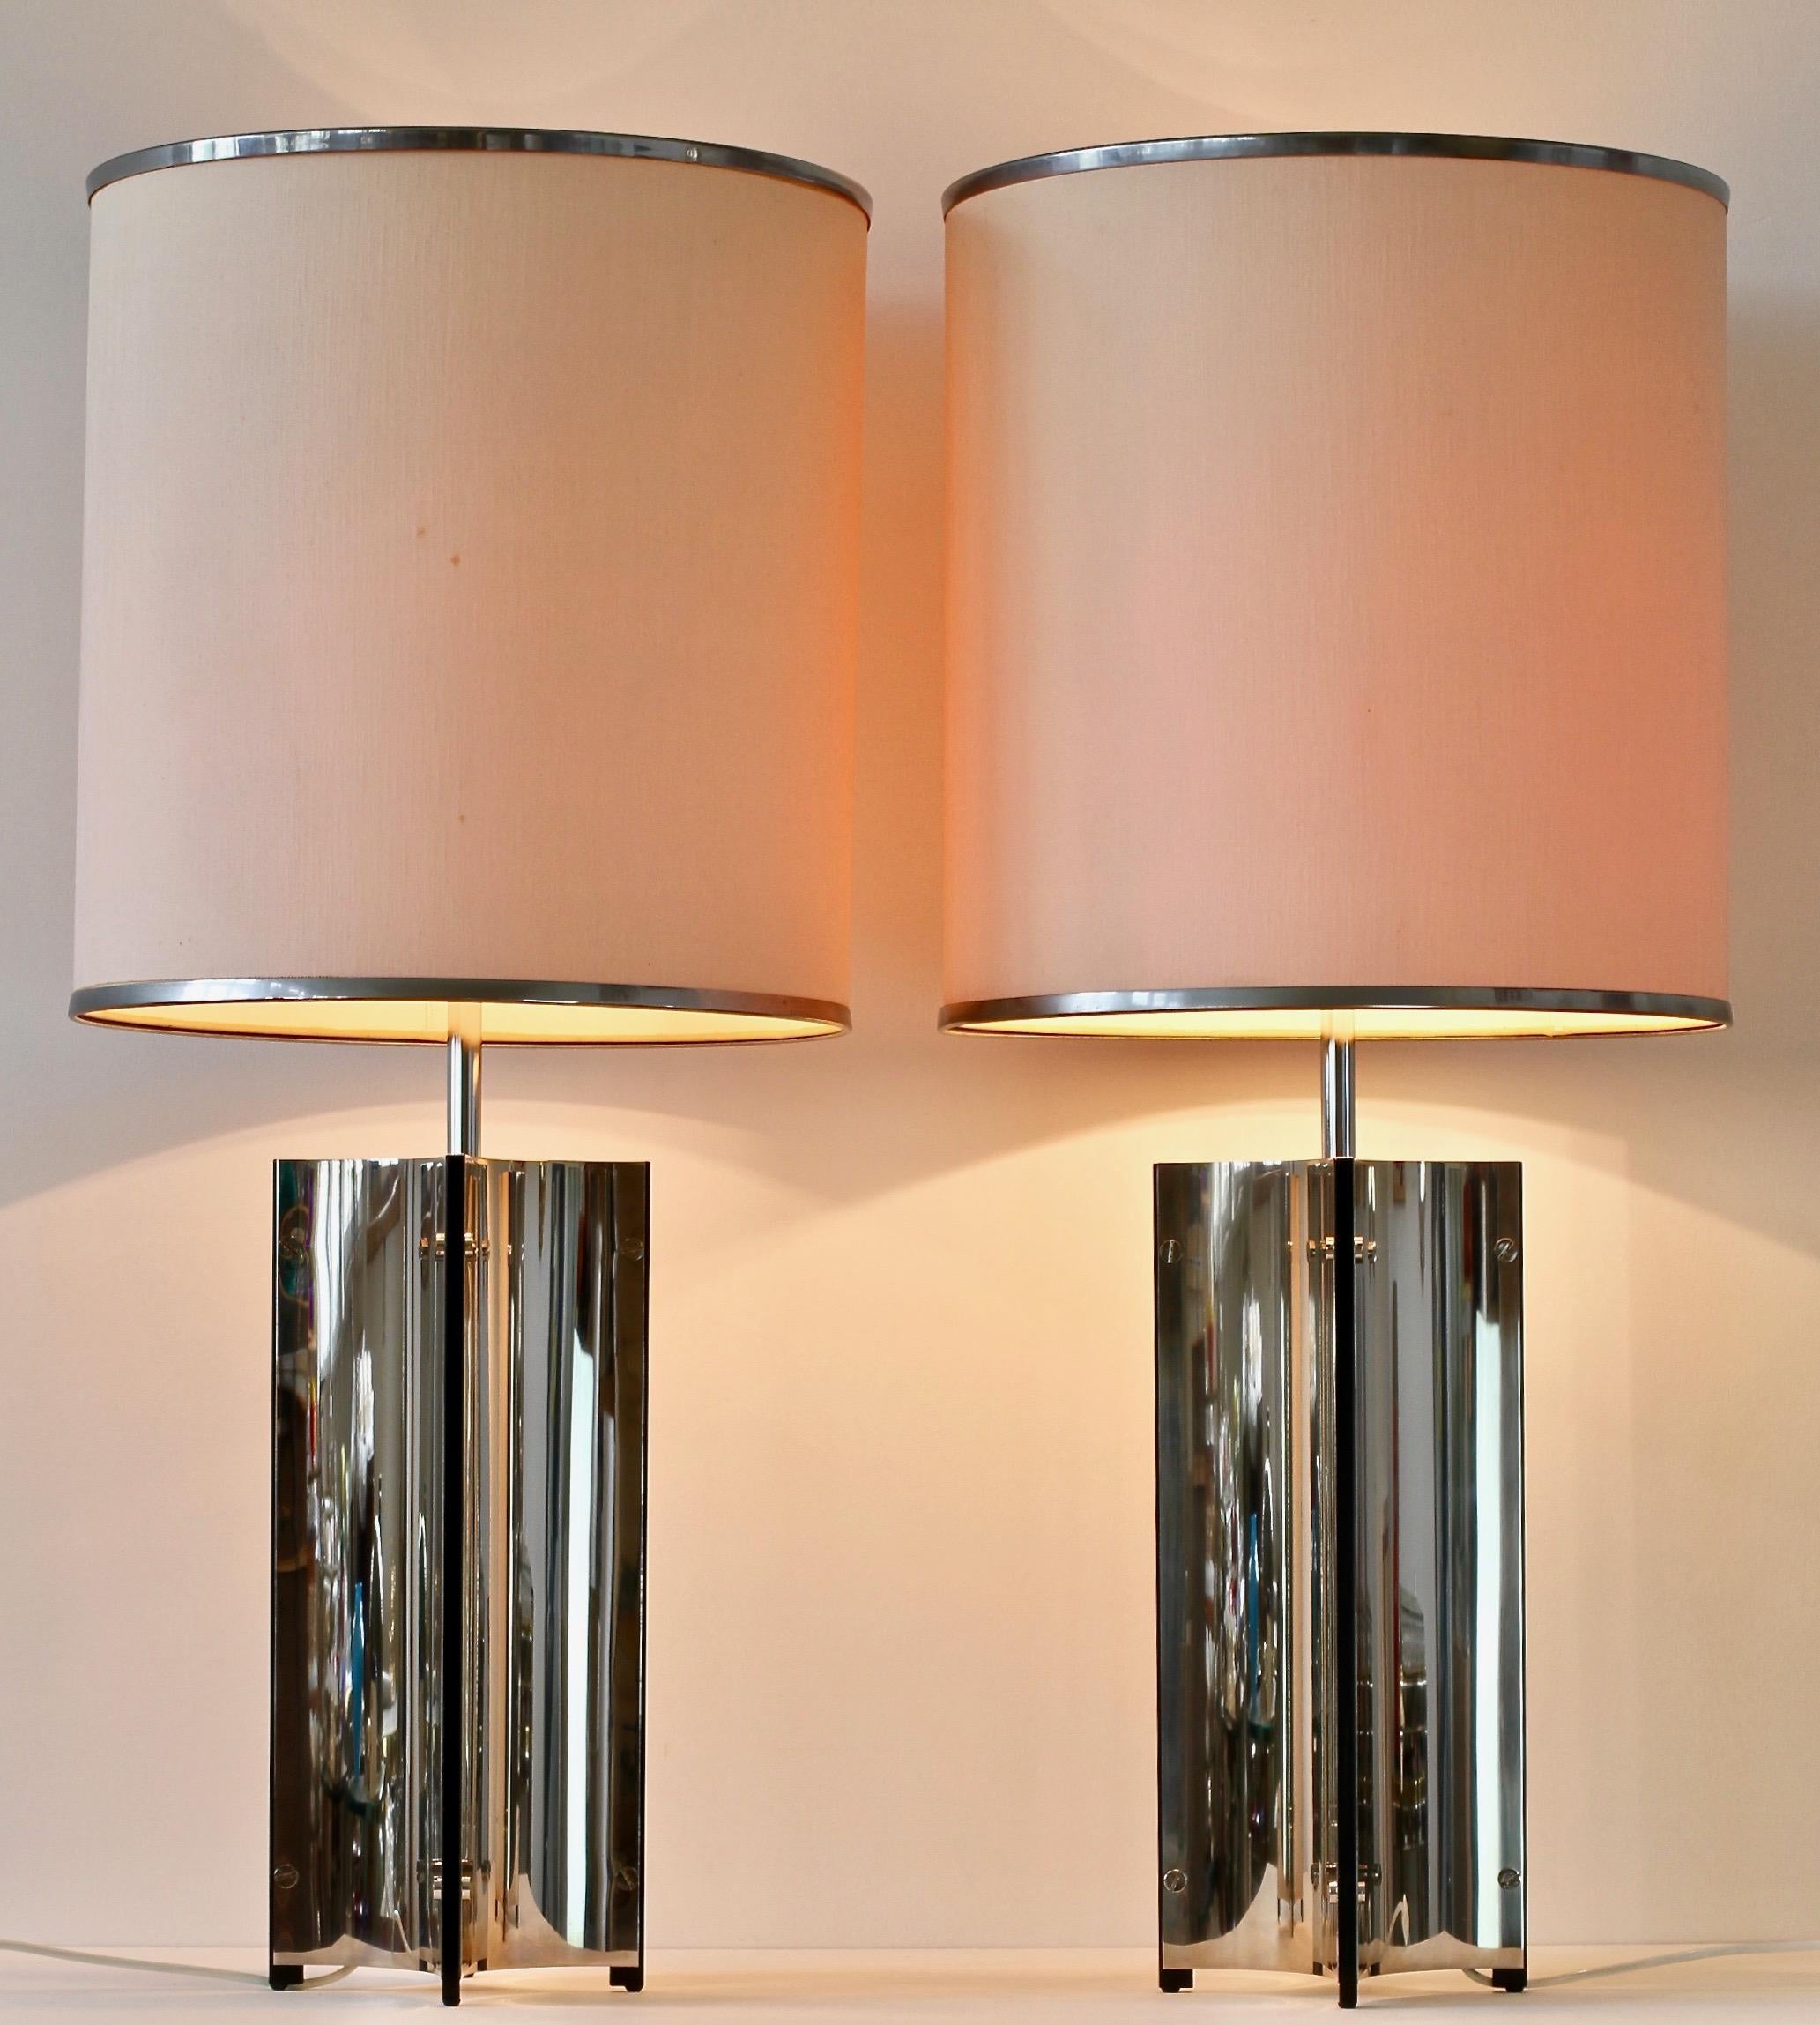 Monumental tall Mid-Century Modern vintage pair of Italian oversized, large-scale table or floor lamps by Gaetano Sciolari circa 1970s. Featuring polished curved bent sheets of steel, these lamps lend themselves to any modern home decor as well as